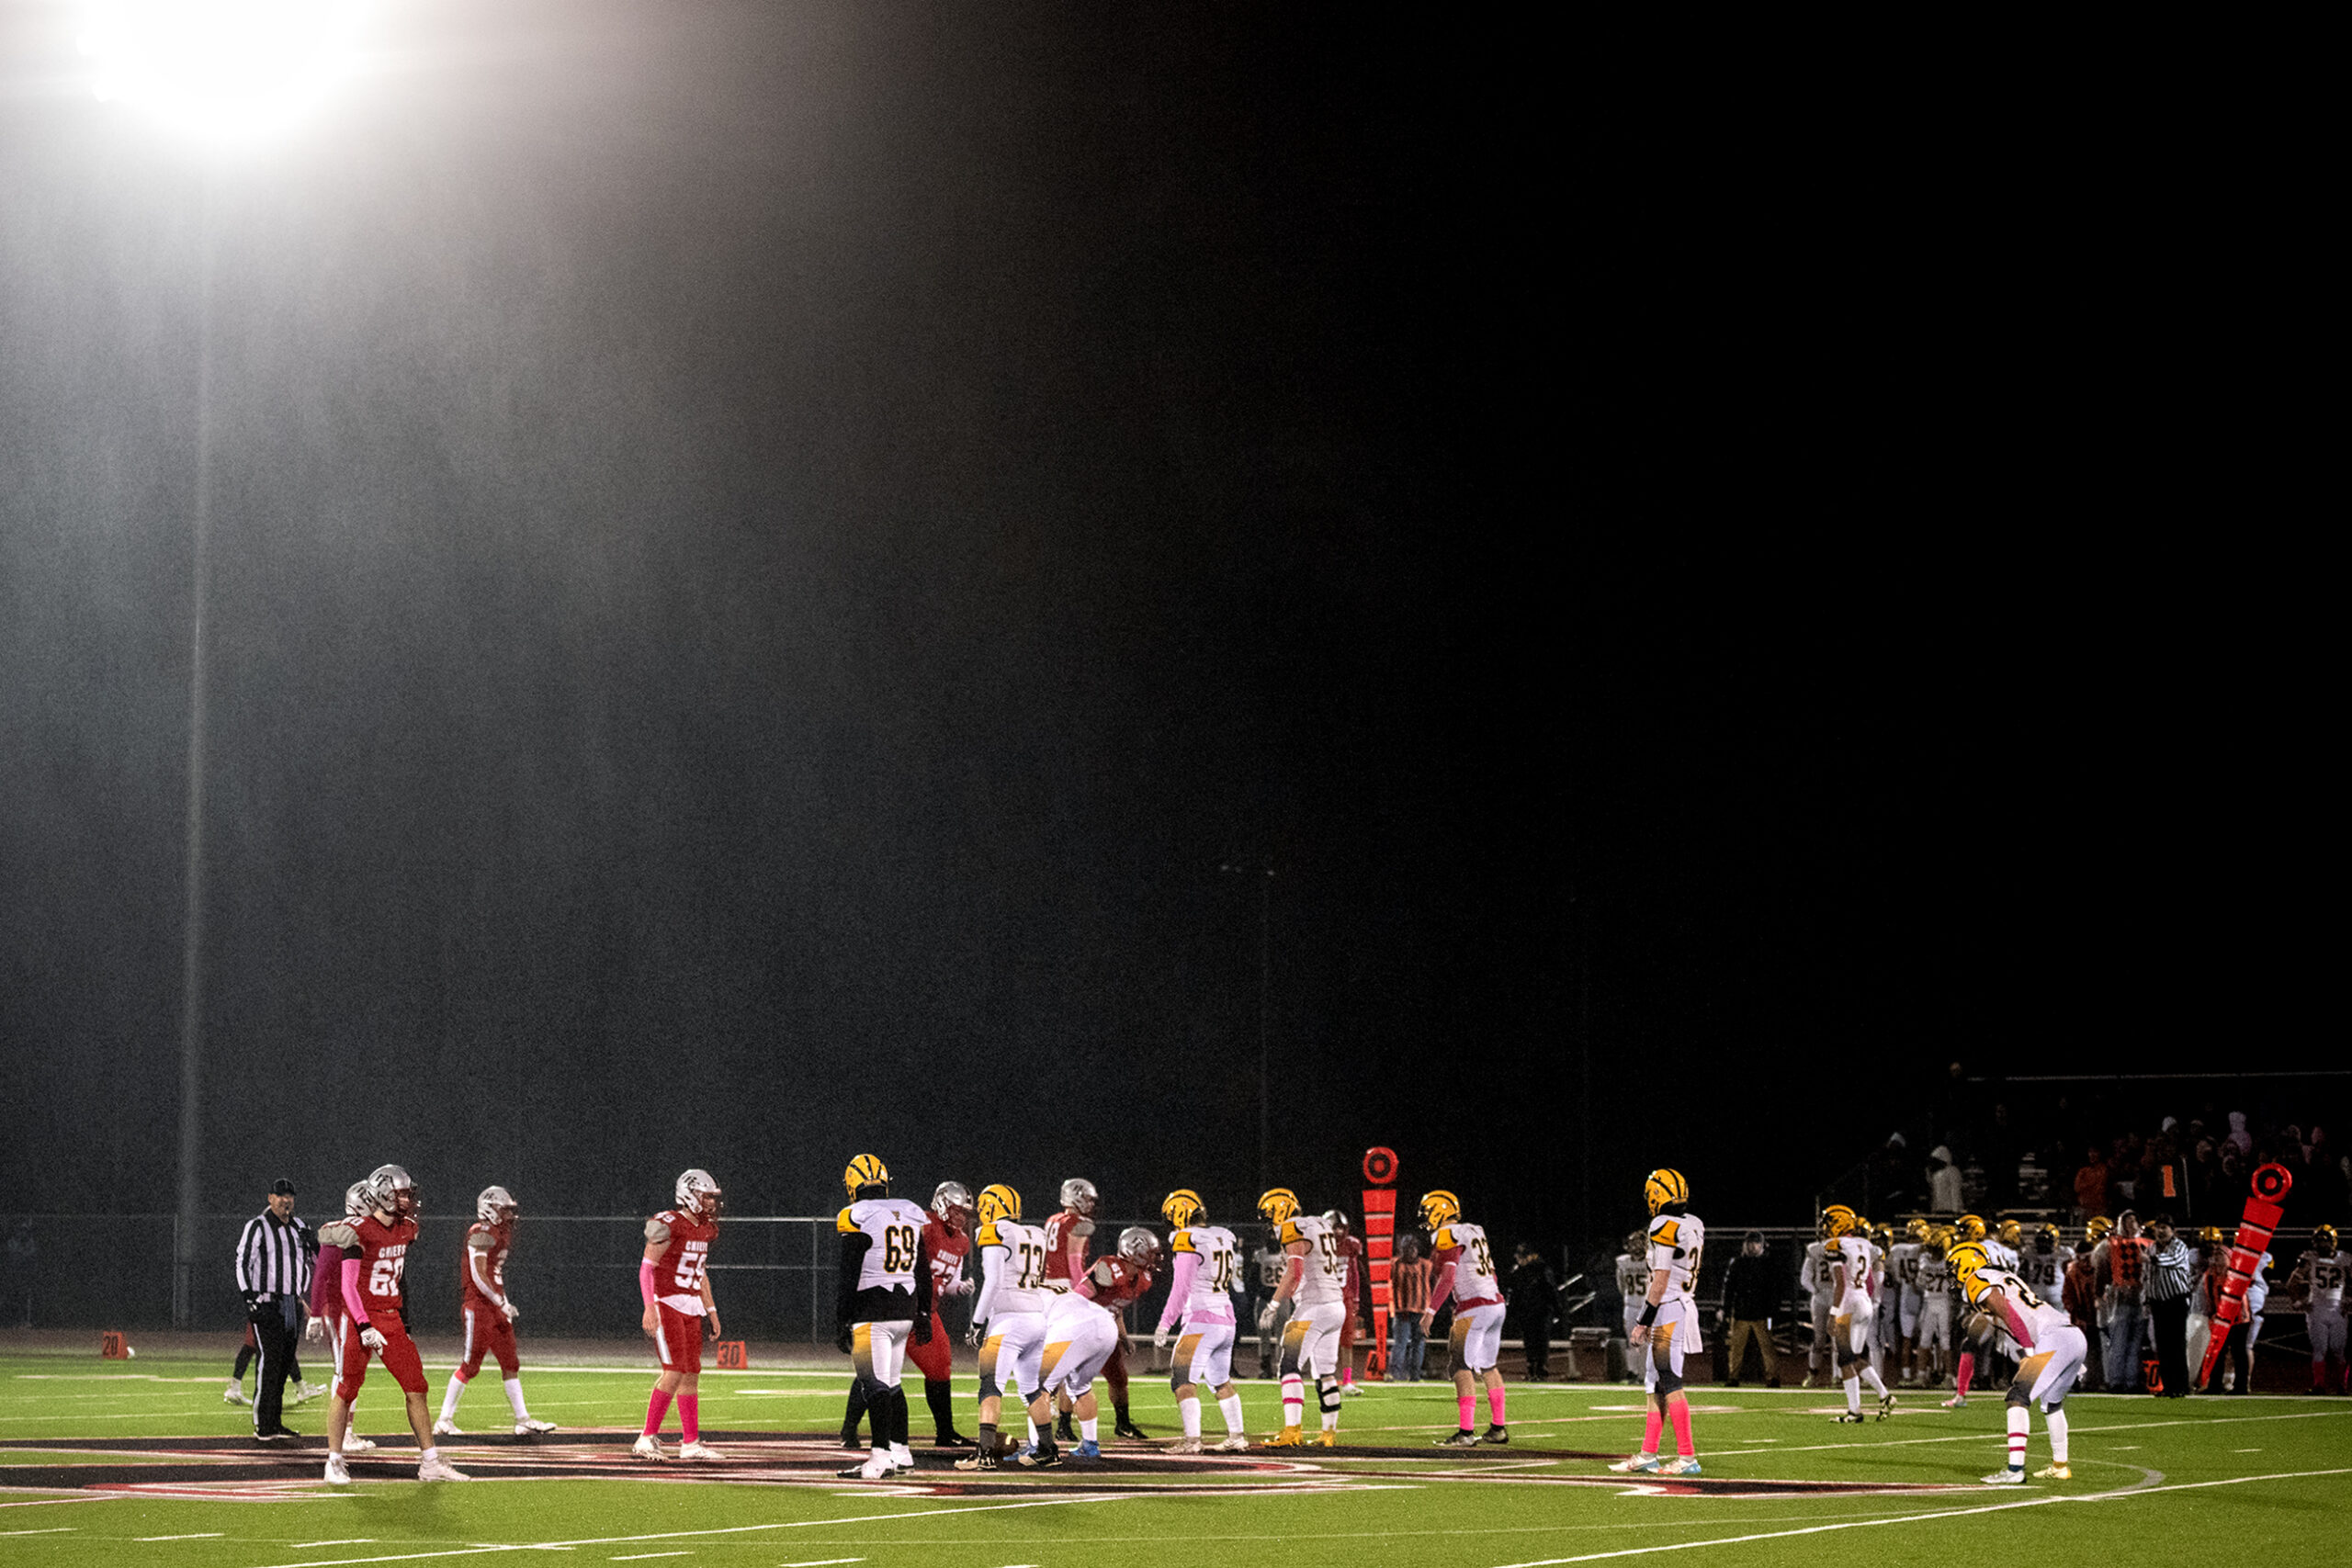 Rain is illuminated by a stadium light as a game takes place on the field below.